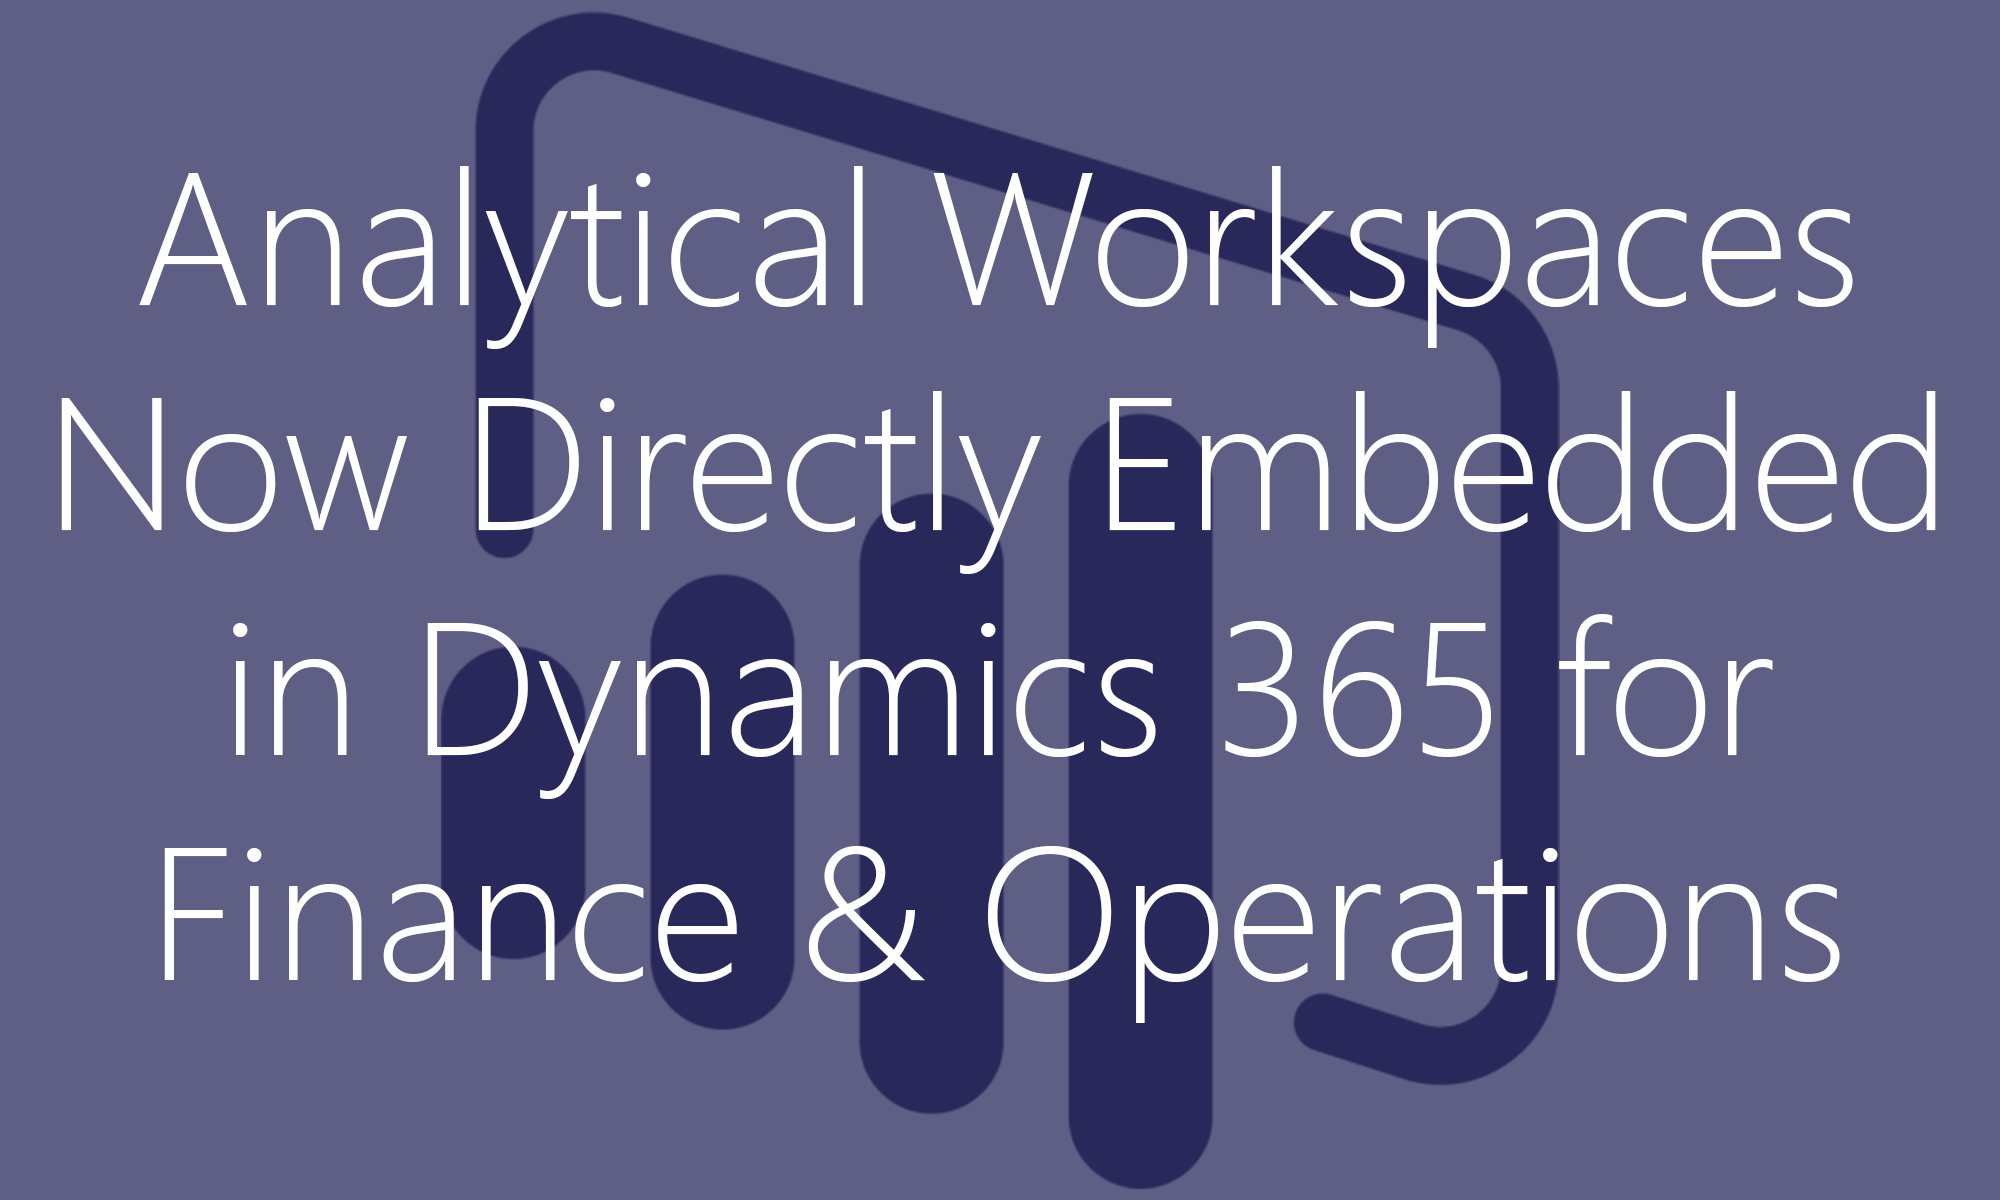 Analytical Workspaces Directly Embedded in Dynamics 365 for Finance and Operations